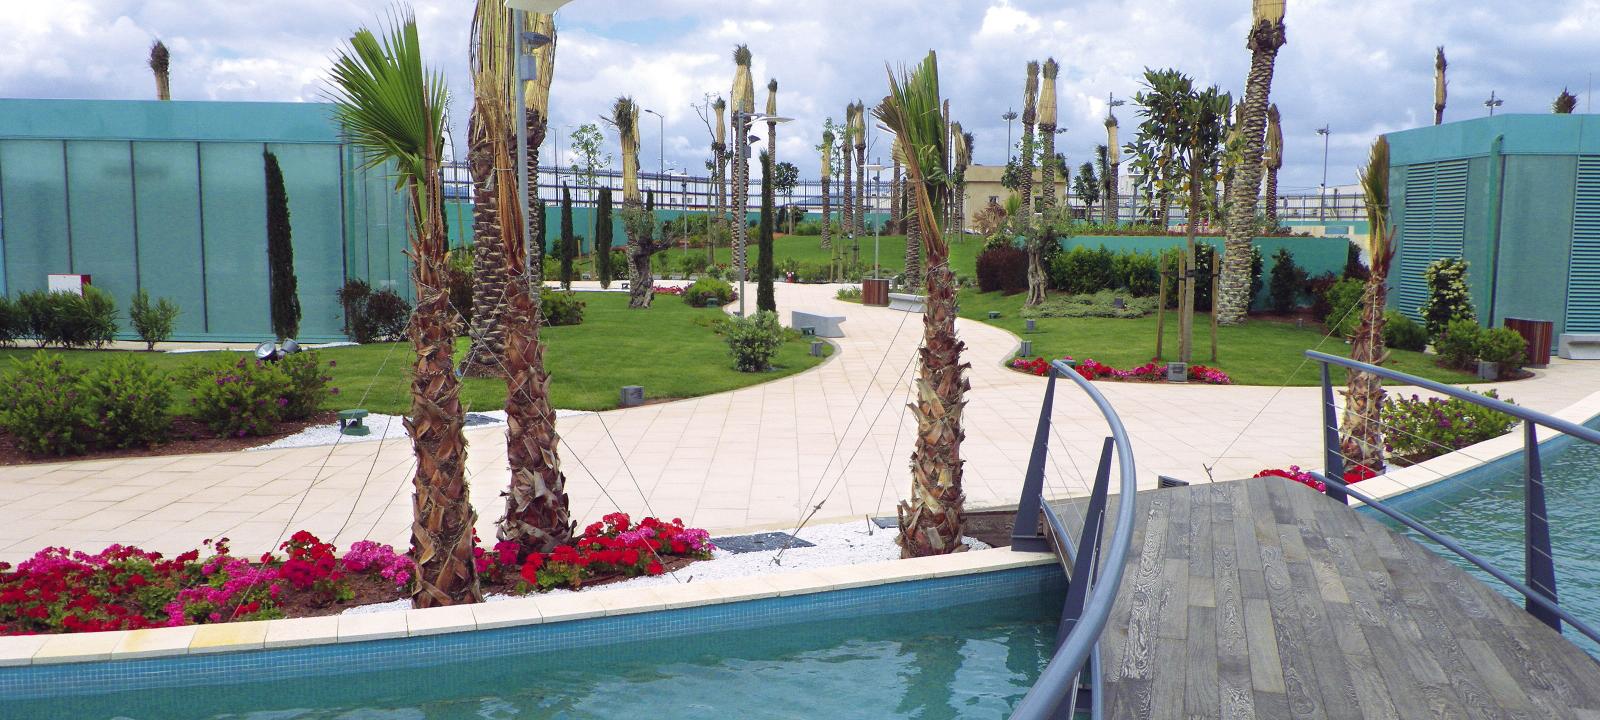 Roof garden with palm trees and a curved wooden bridge leading over a water basin